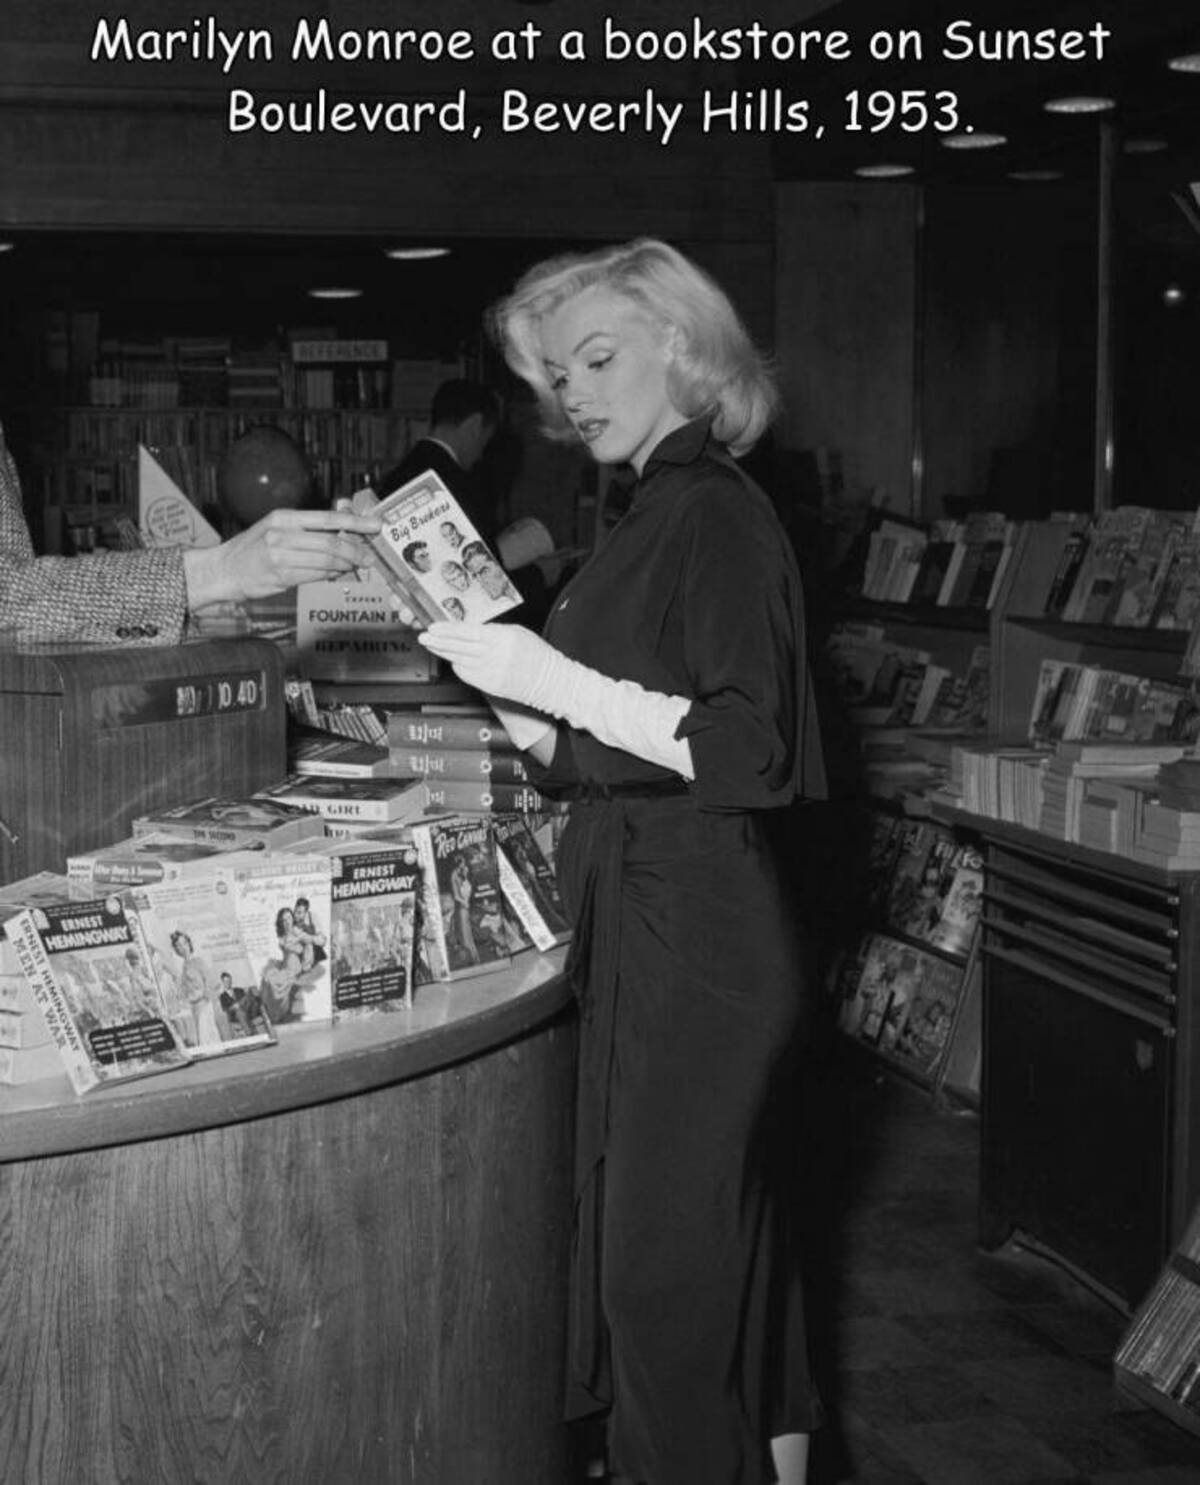 hollywood stars reading - Ernest Hemingway Marilyn Monroe at a bookstore on Sunset Boulevard, Beverly Hills, 1953. Reference Big Brokers 10.40 Fountain Reparing Au Girl Ernest Hemingway 11 Wat Canmas